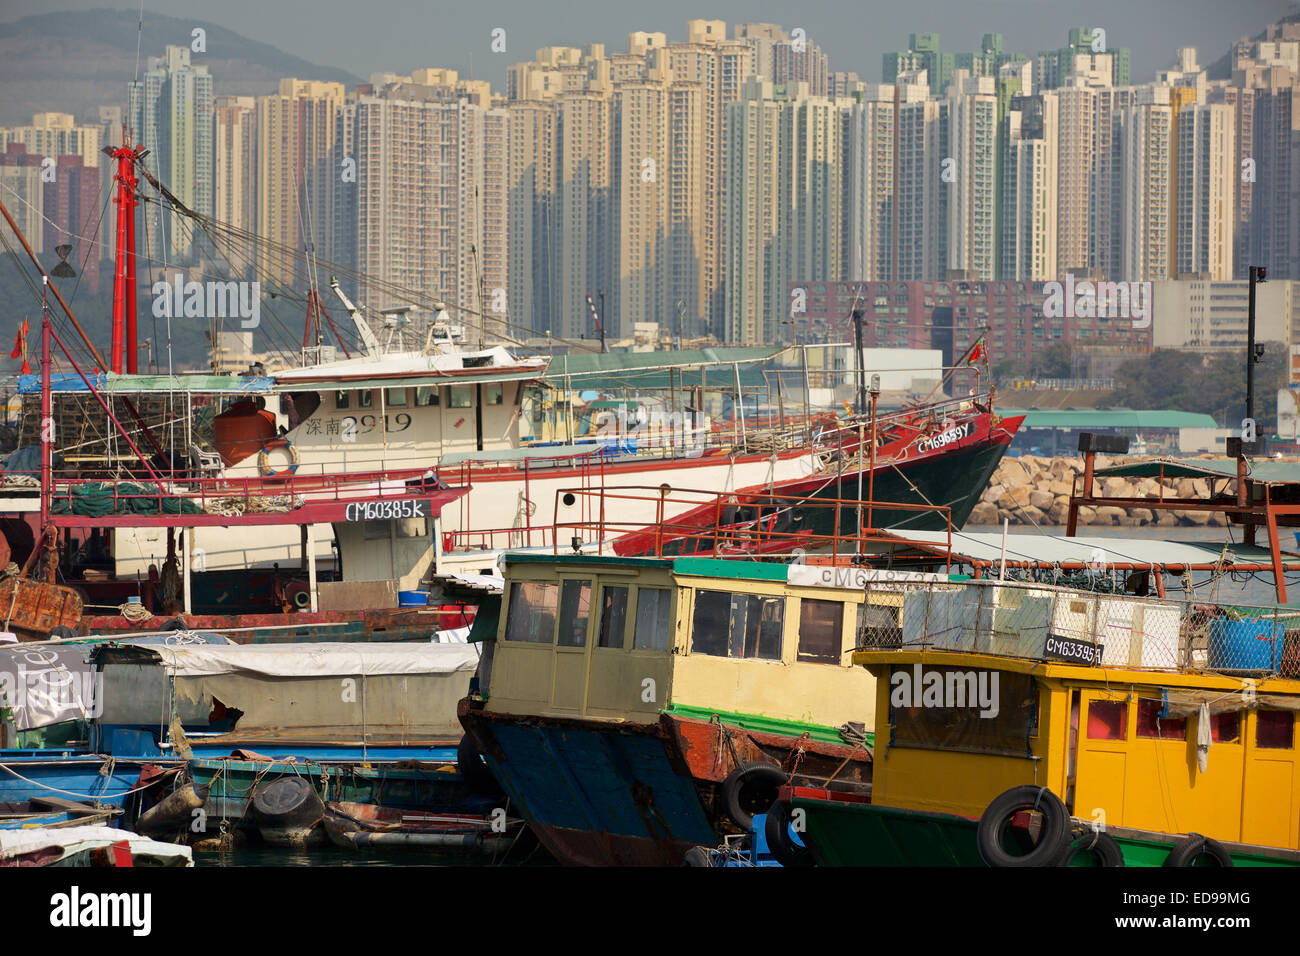 Crowded bay Hong Kong HK. Collection of assorted boats crammed into a small space. The land behind is also very developed Stock Photo